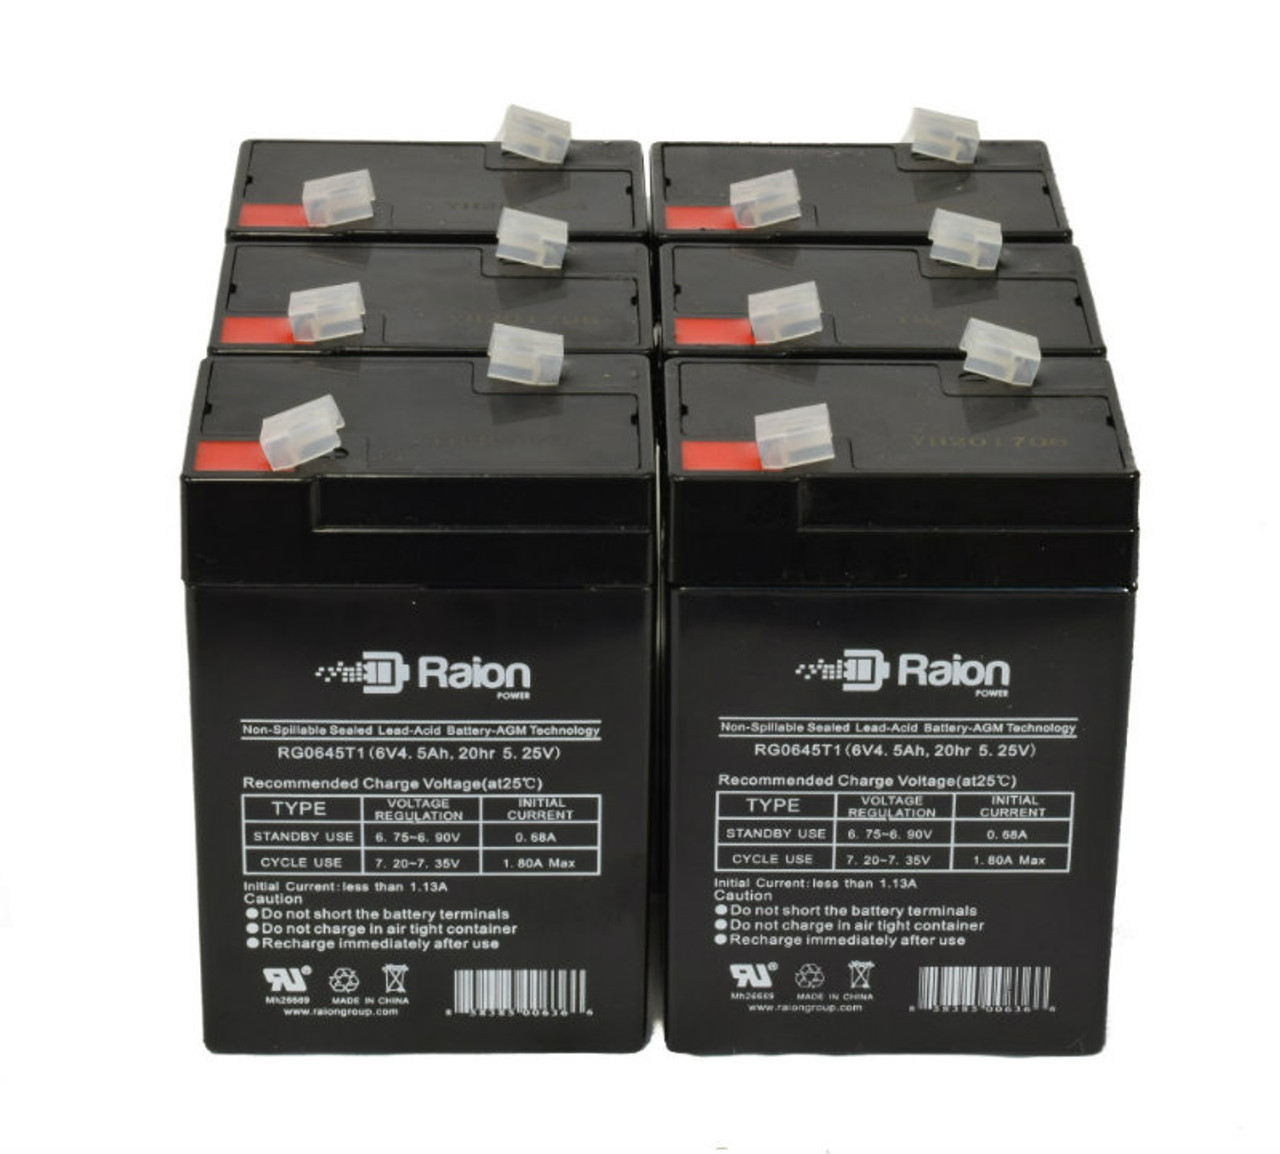 Raion Power 6 Volt 4.5Ah RG0645T1 Replacement Battery for Teledyne Big Beam S64 - 6 Pack